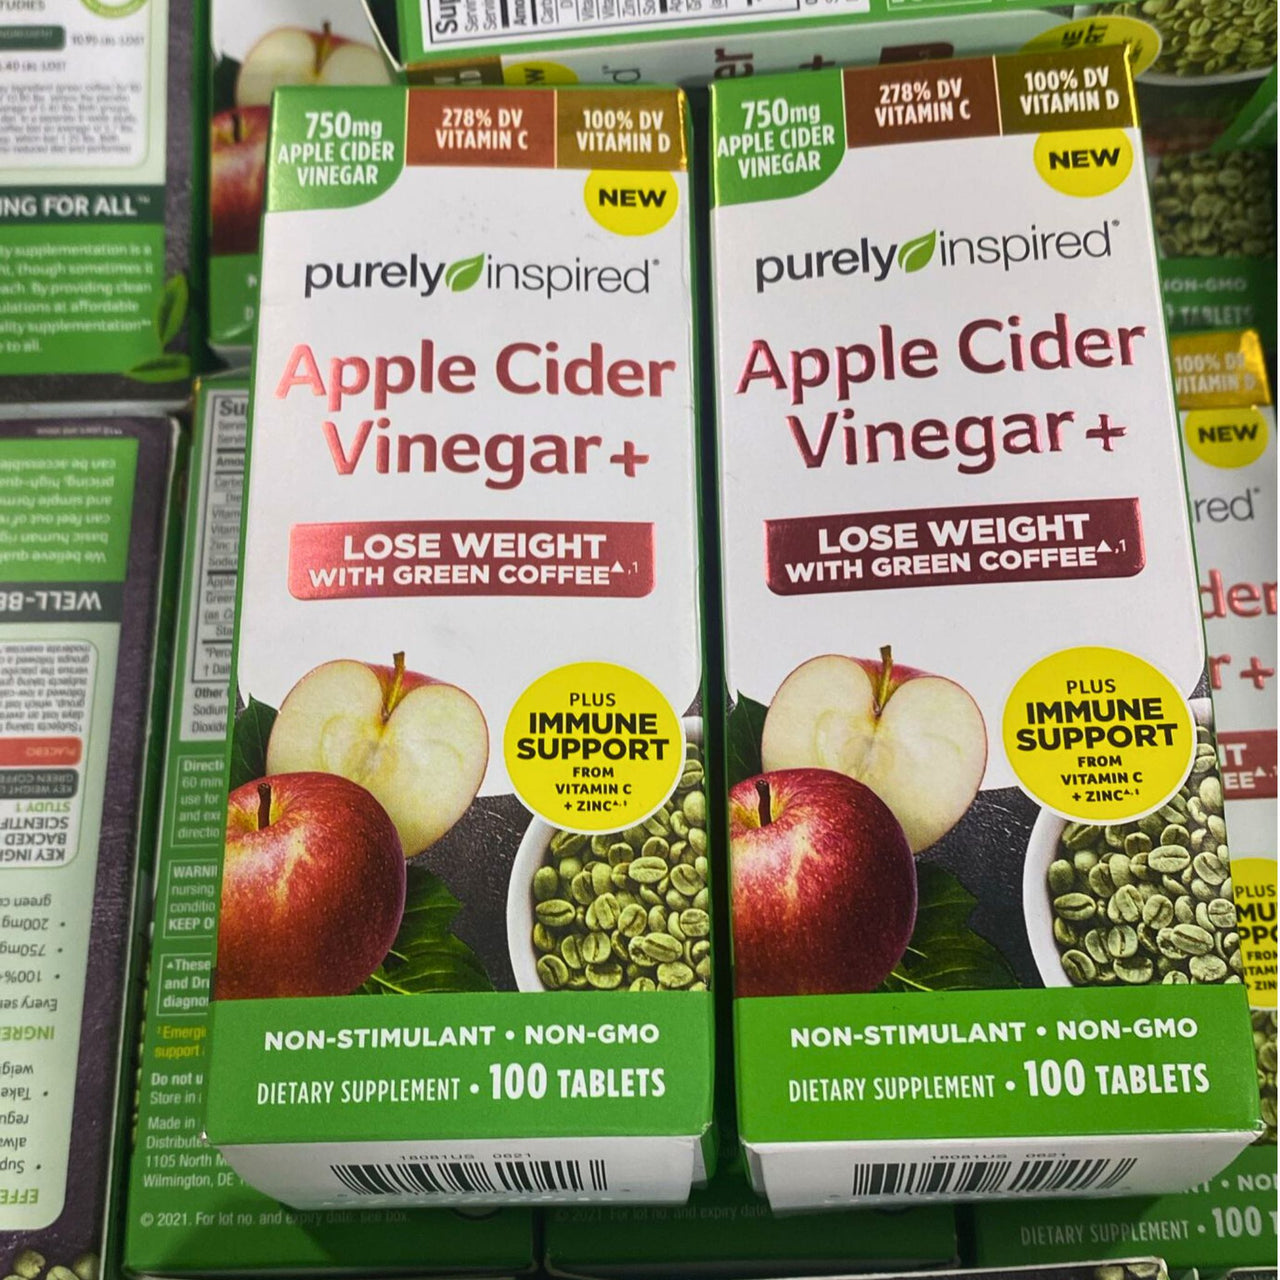 Purely Inspired Apple Cider + Vinegar Lose Weight with Green Coffee Non Stimulant Non Gmo 100 Tablets (50 Pcs Lot)